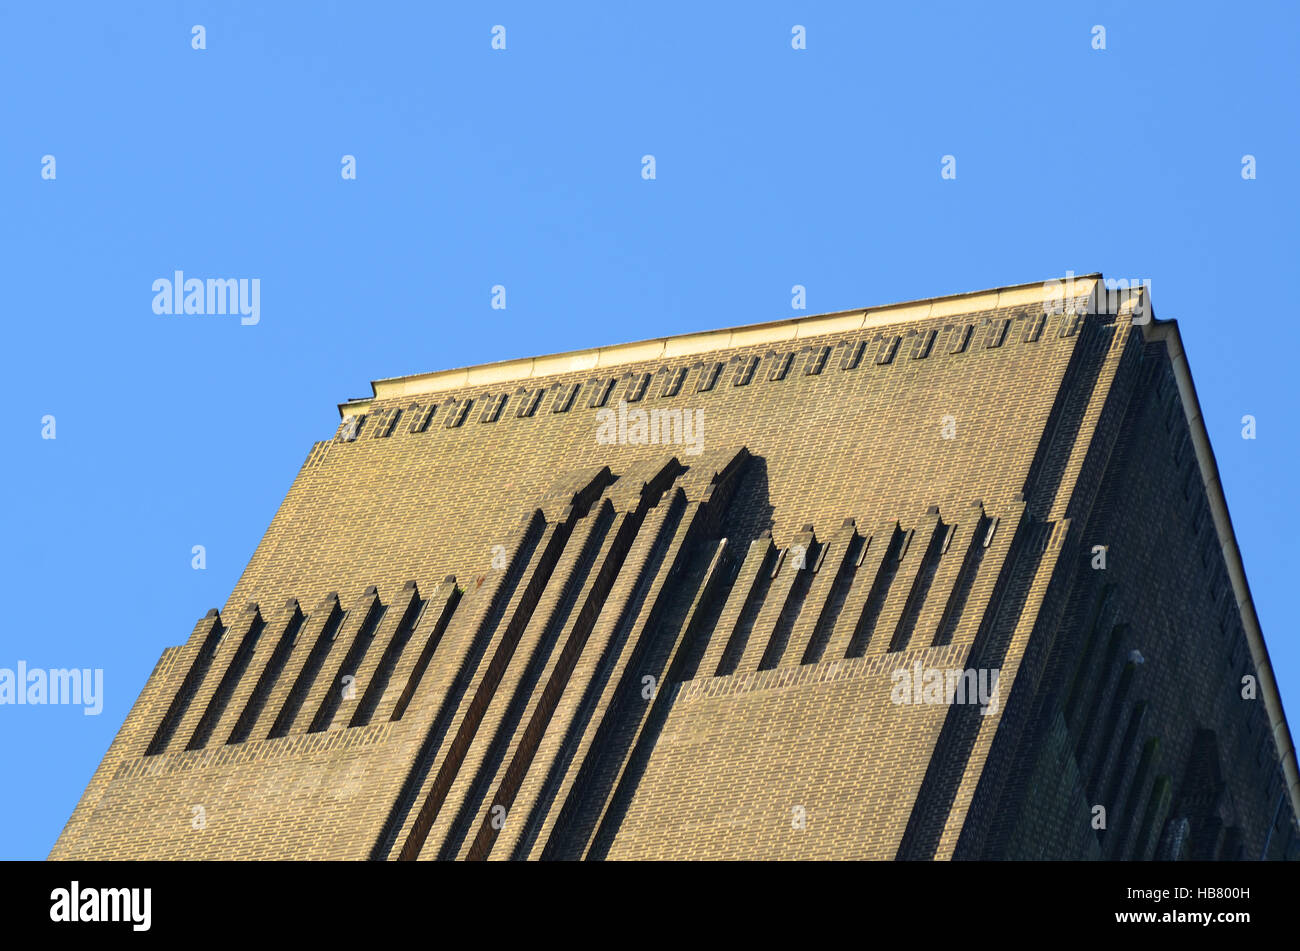 Tate Modern chimney. The substantial brick central chimney, standing 99 m (325 ft), of Tate Modern and previously Bankside Power Station, London, UK Stock Photo